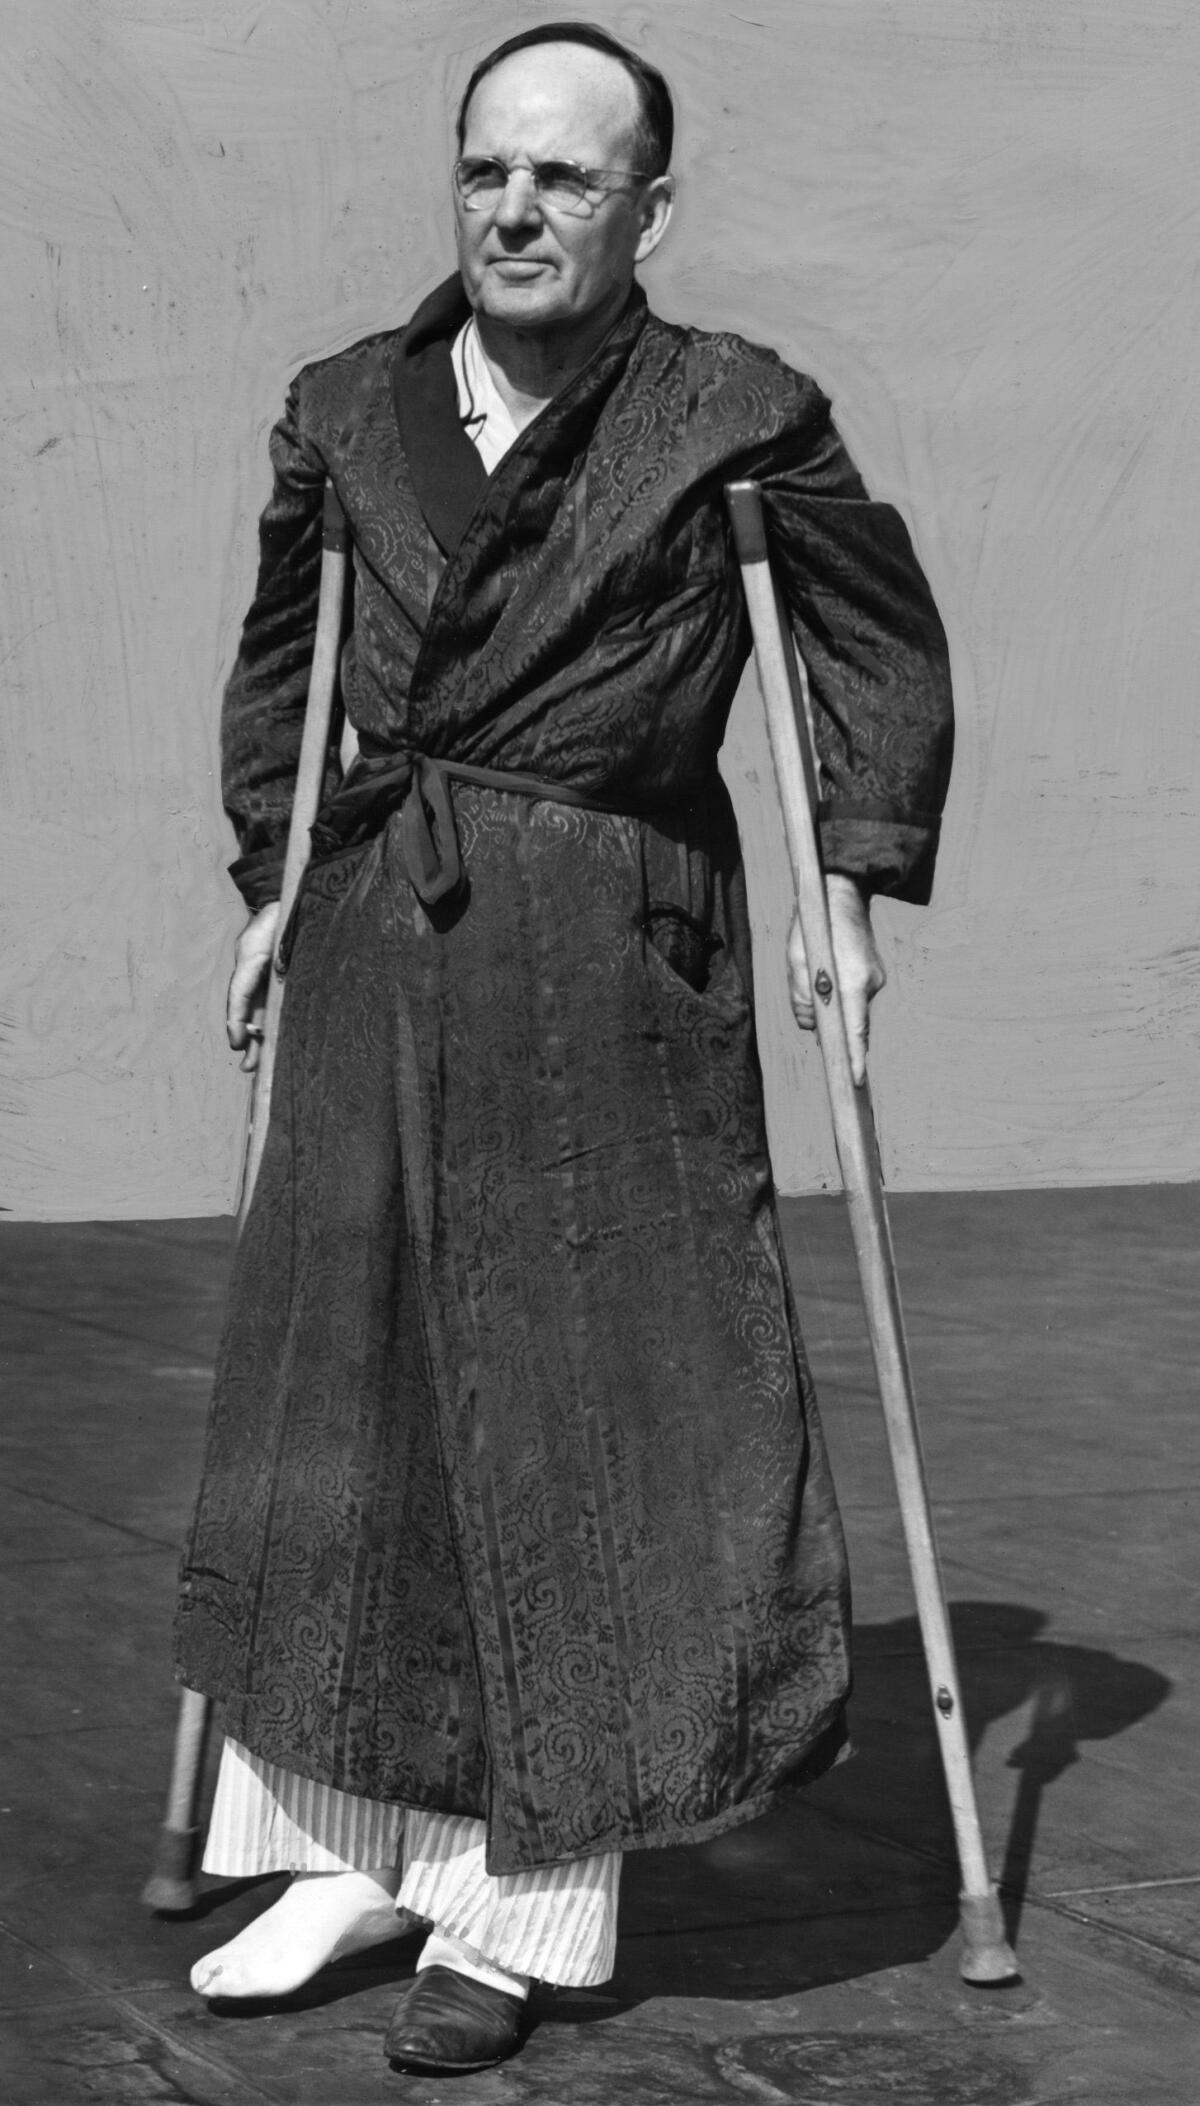 Black and white photo shows Harry Raymond on crutches.